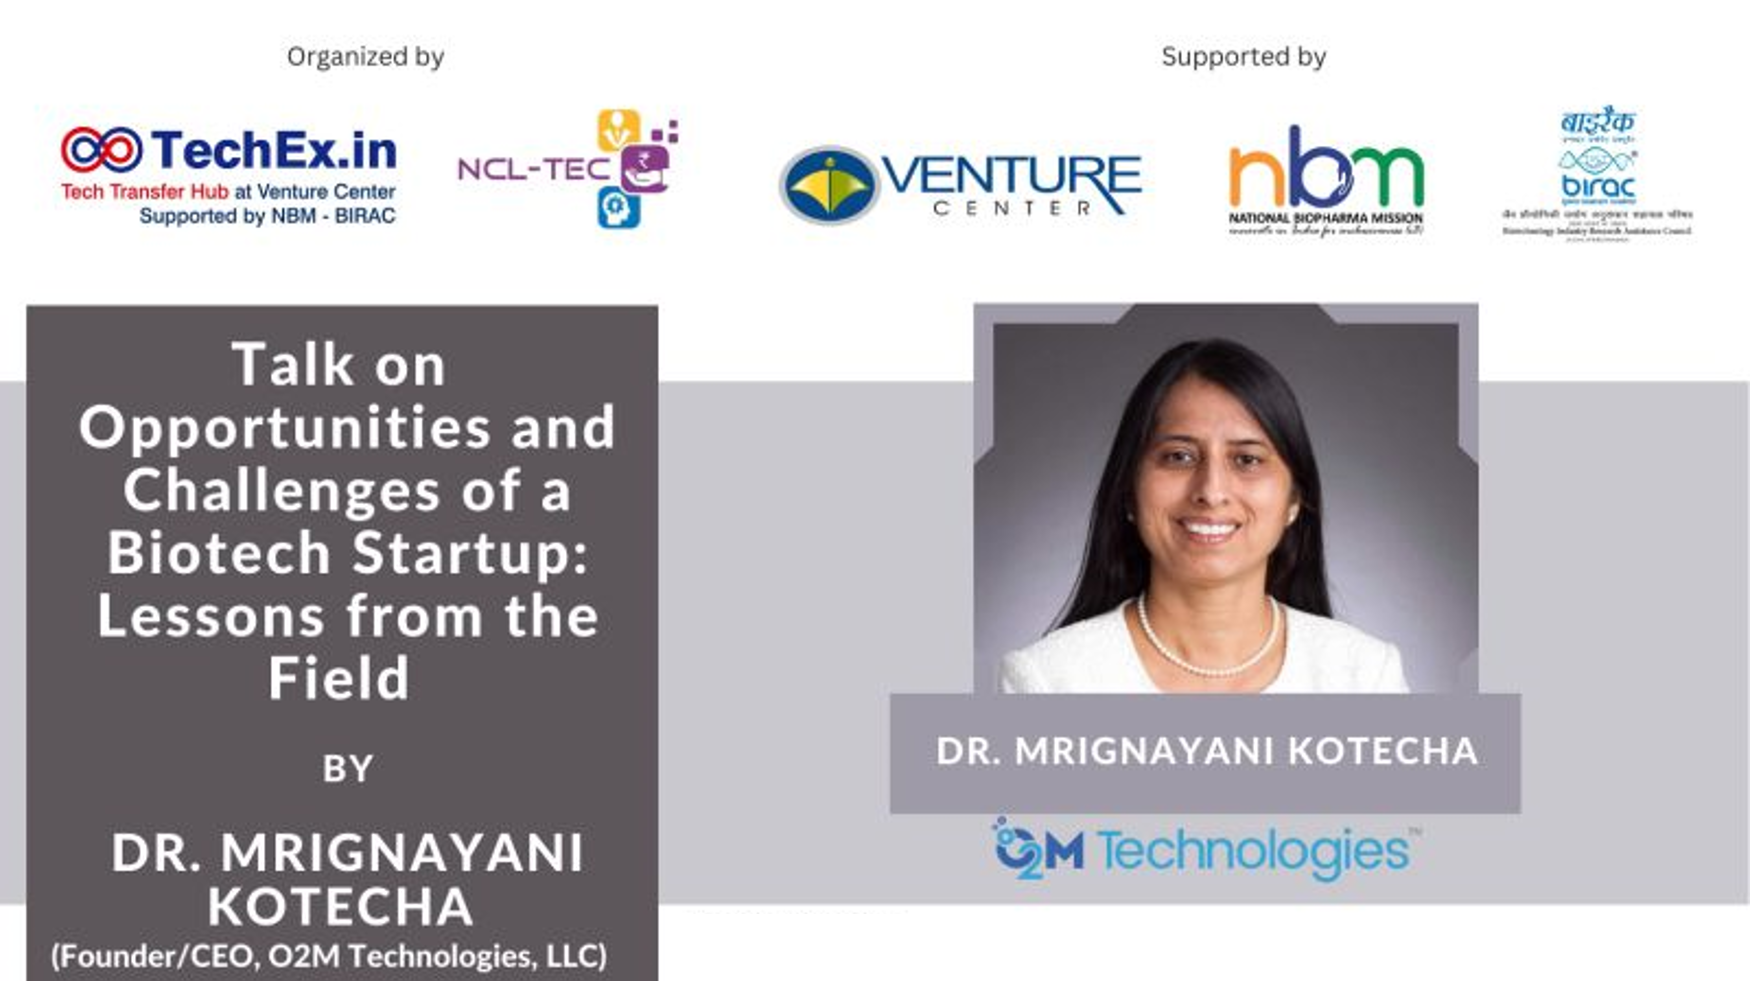 Opportunities and Challenges of a Biotech Startup: Lessons from the Field |TechEx.in and NCL-TEC